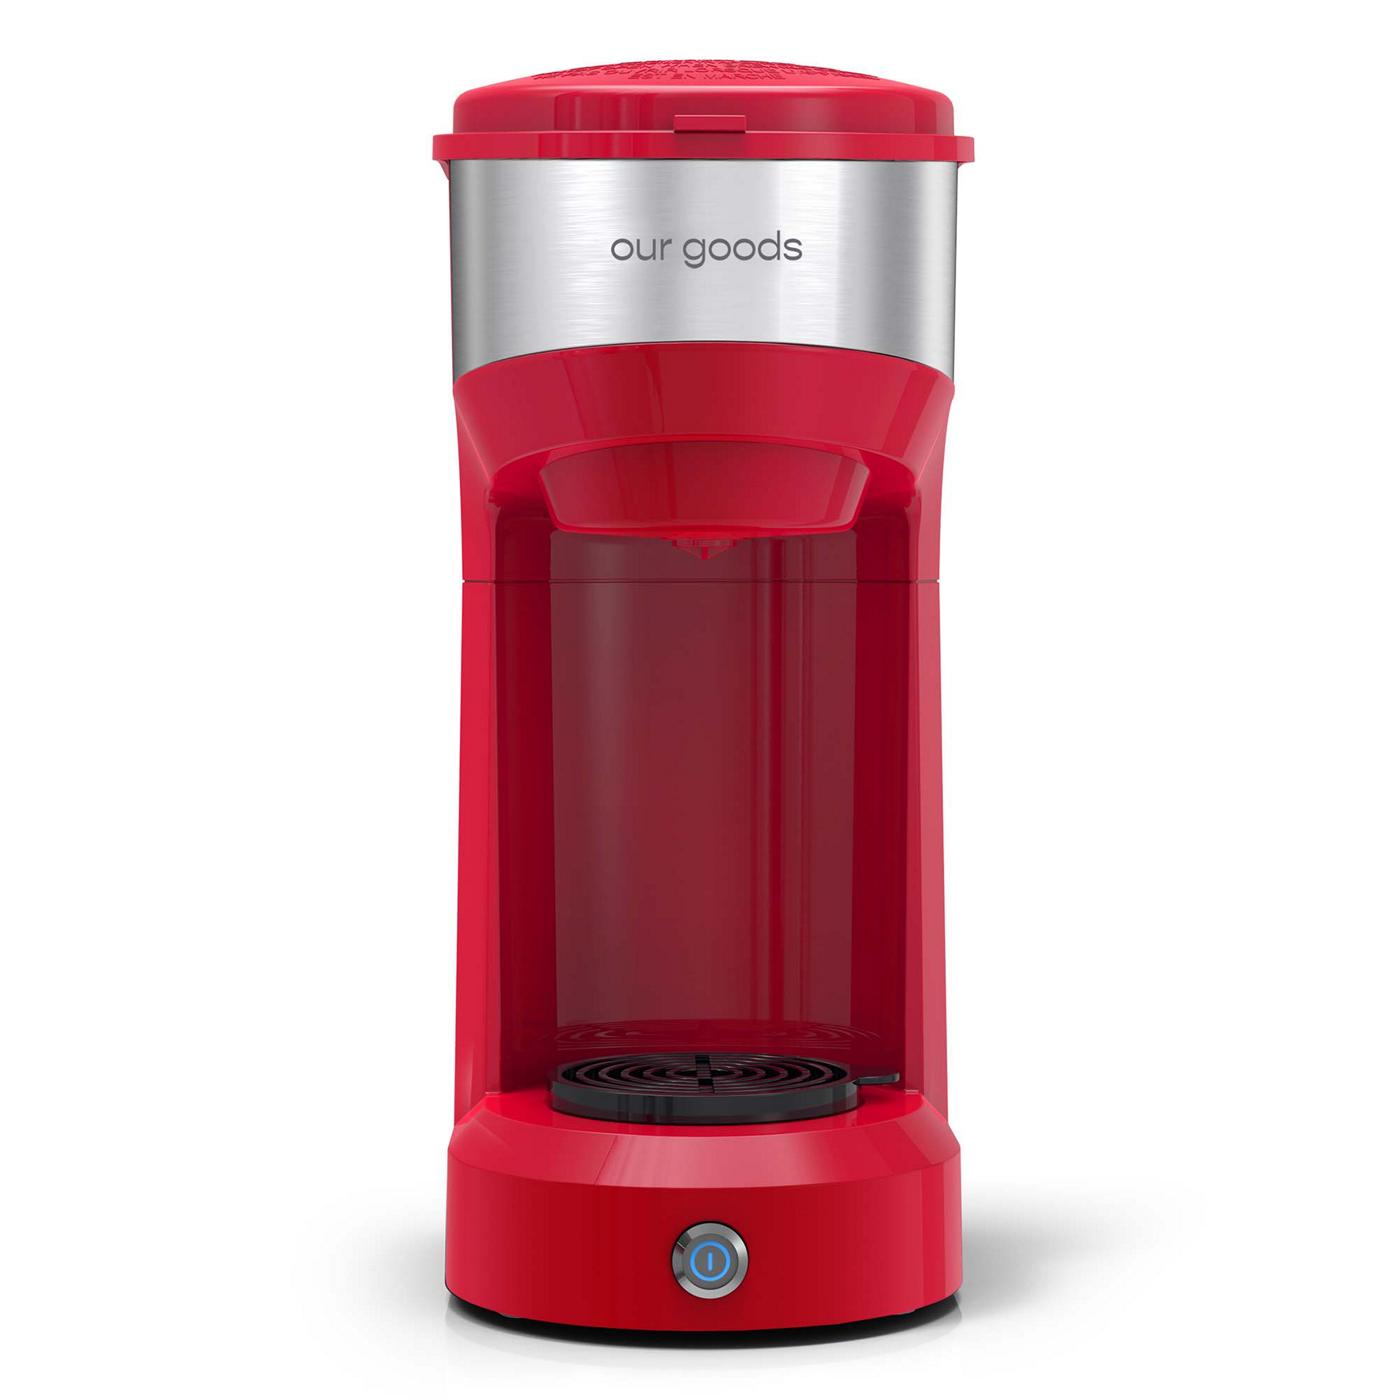 our goods Single Serve Coffee Maker - Scarlet Red; image 1 of 3